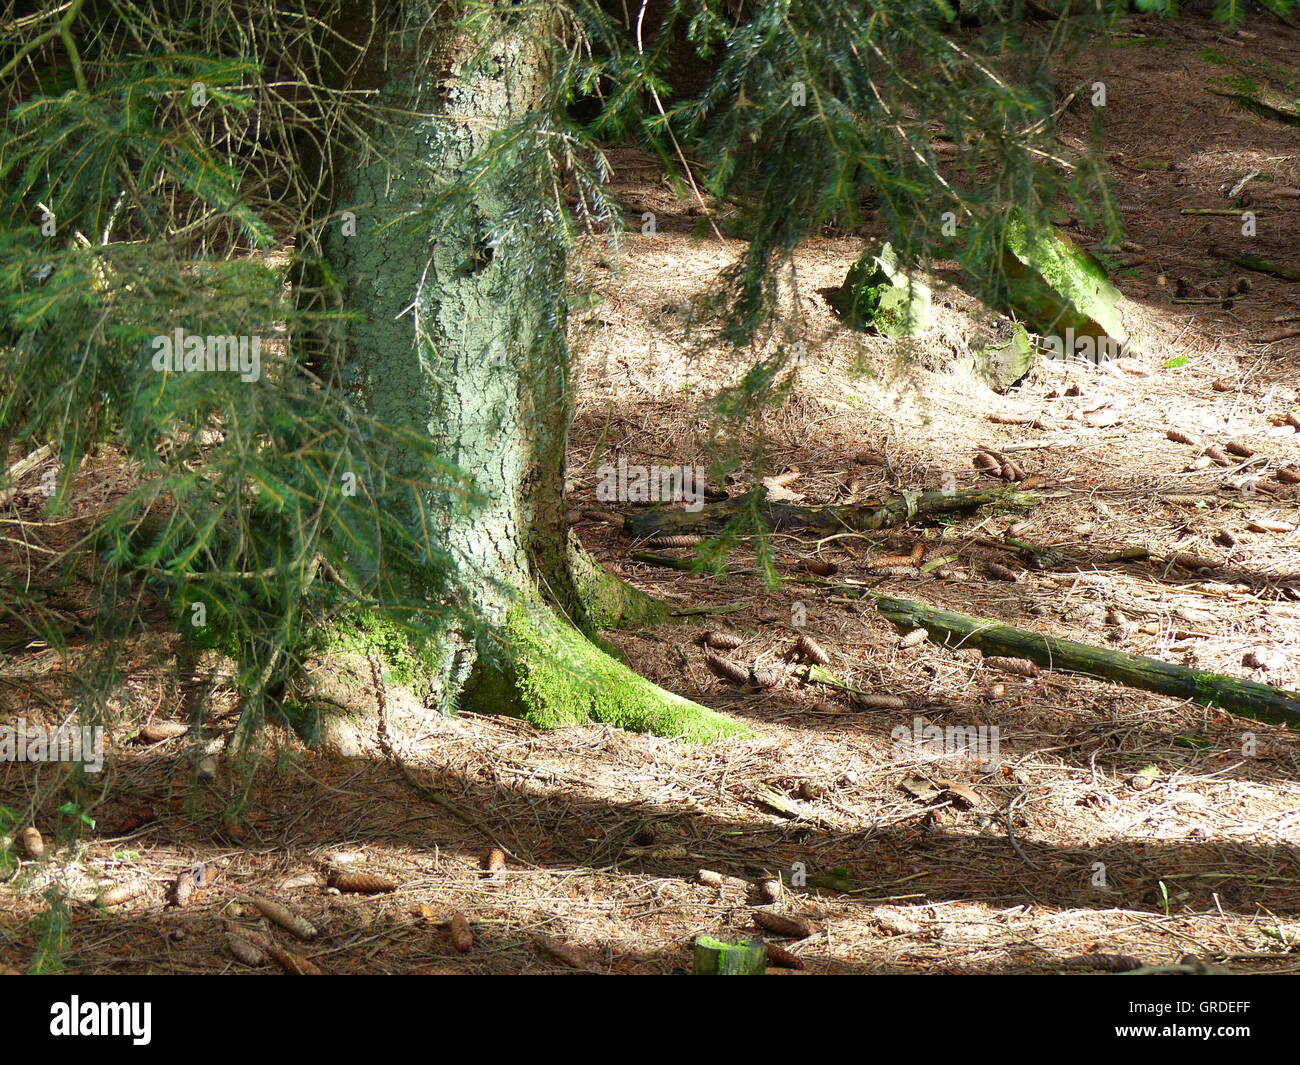 Spruce In The Forest, Partial View Of Trunk, Branches, Forest Floor Stock Photo